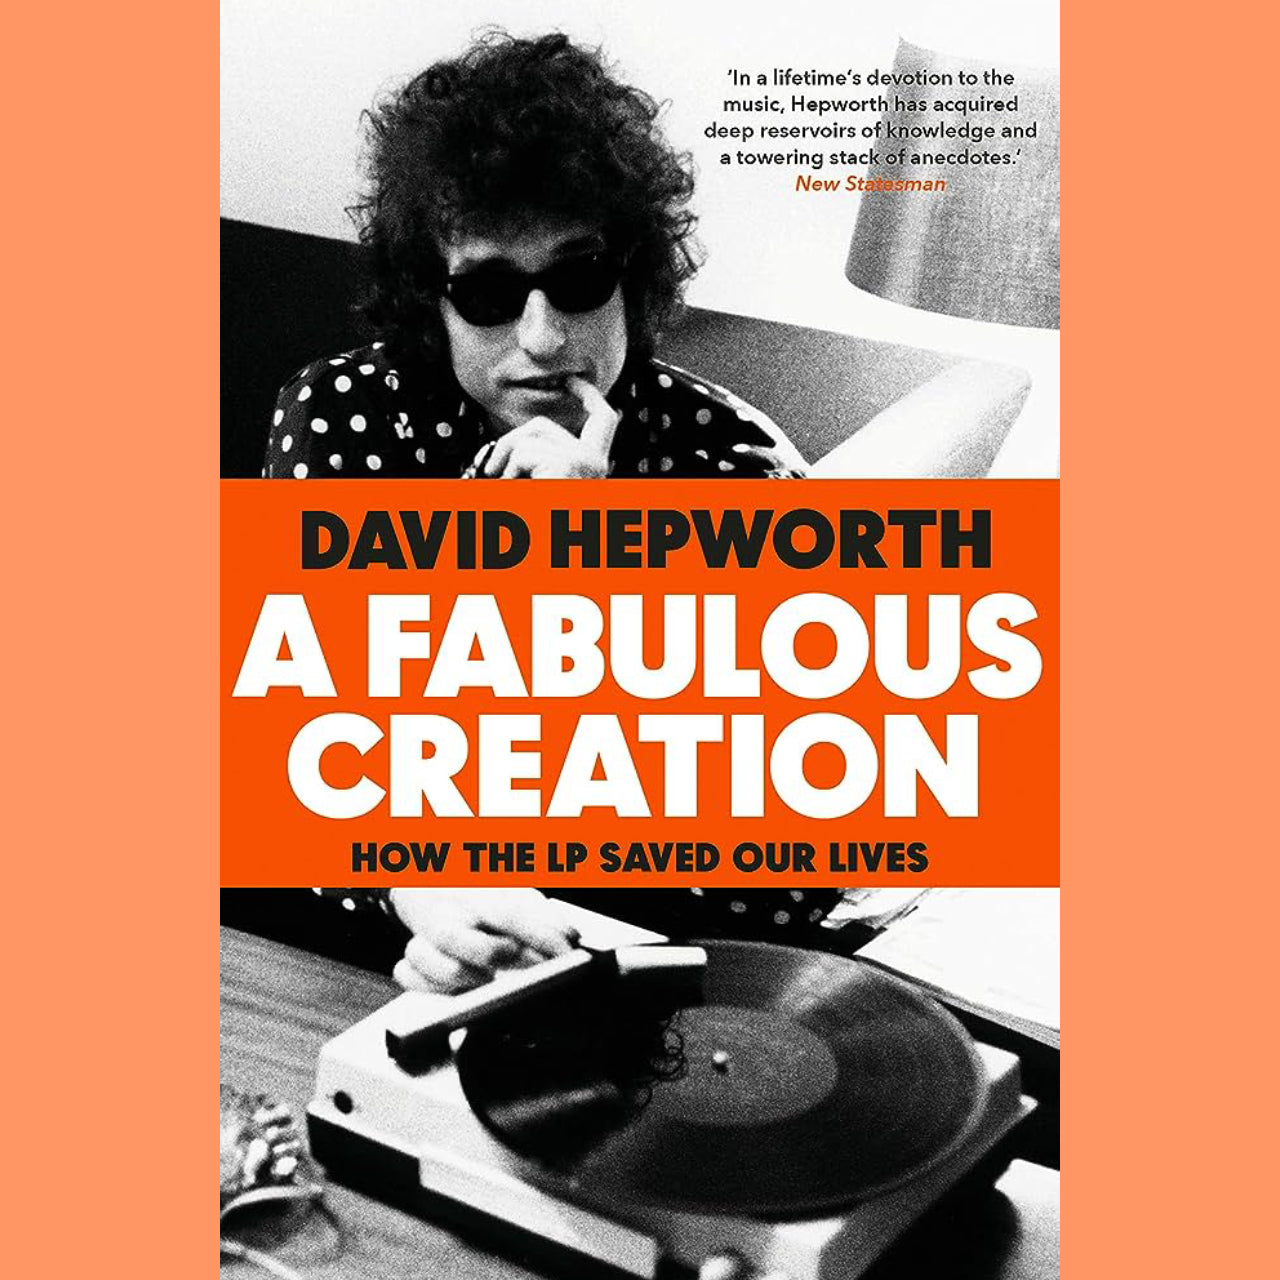 David Hepworth - A Fabulous Creation | Buy the book from Flying Nun Records